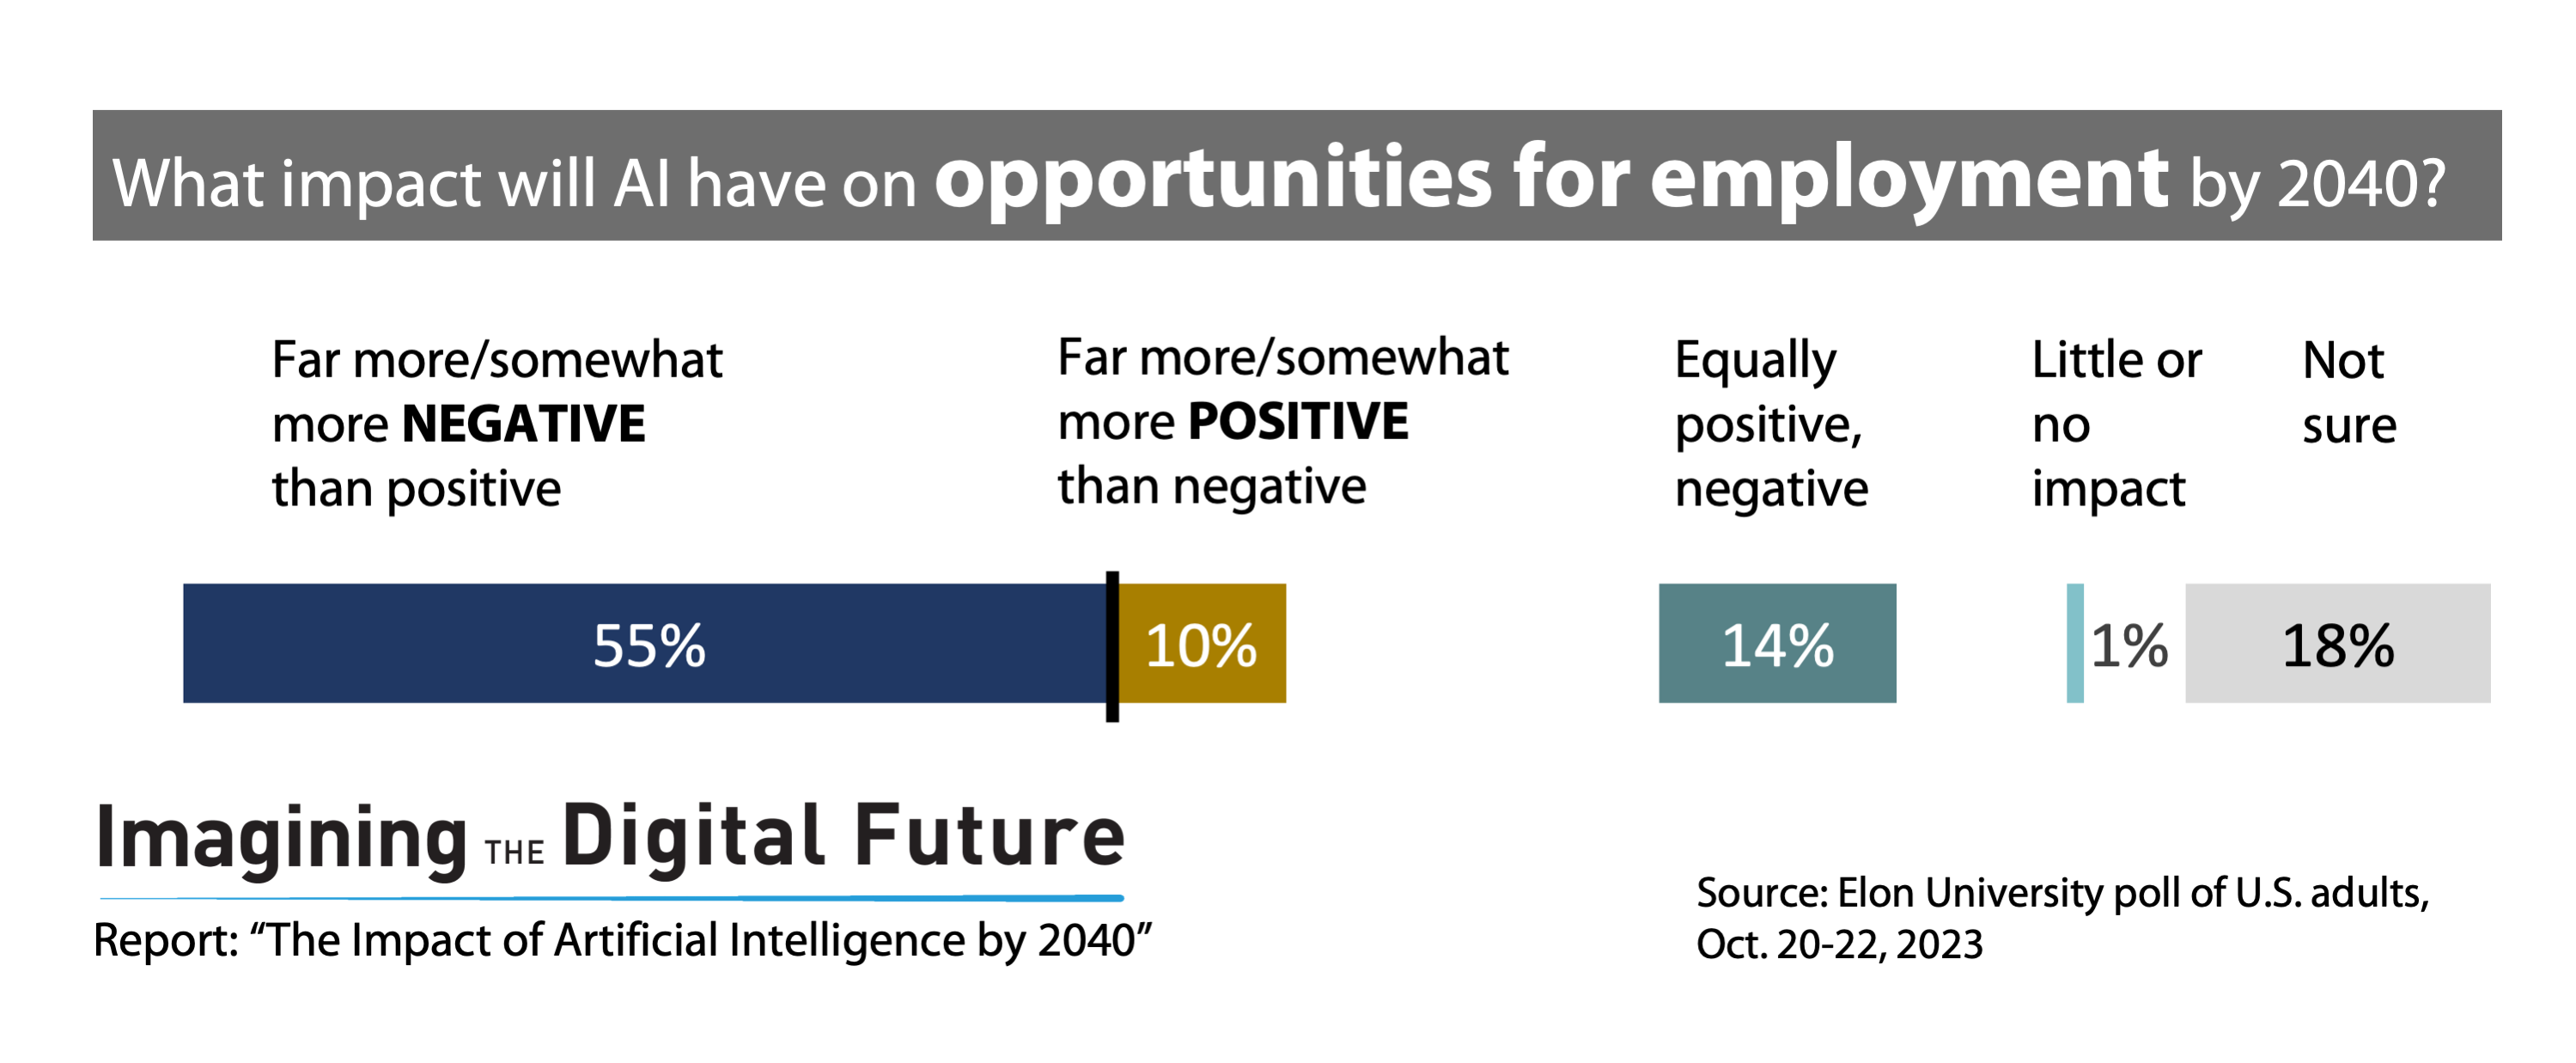 AI impact on employment opportunities